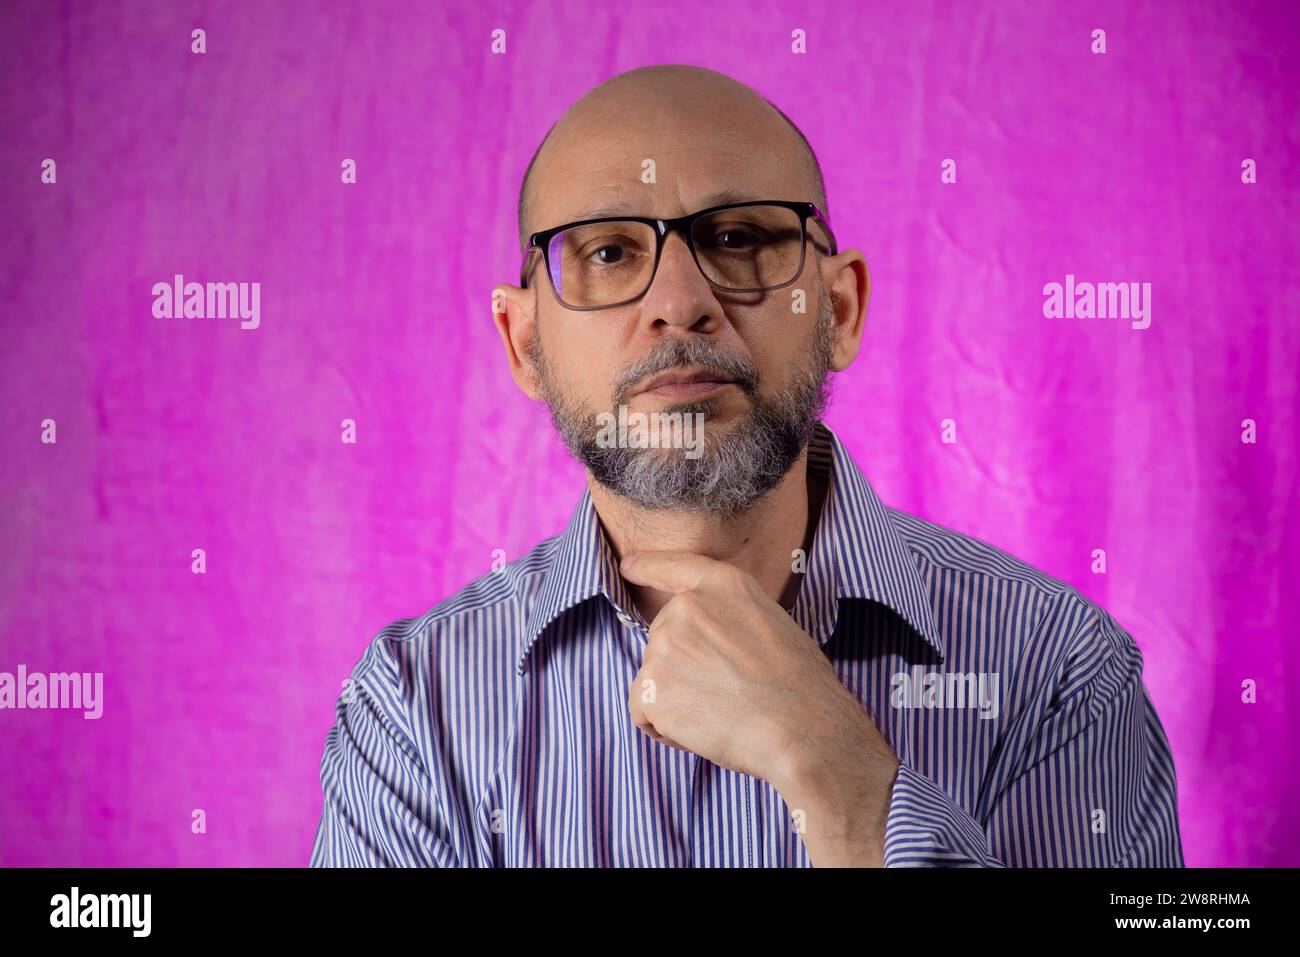 Bald, bearded man looking at camera against pink background. Stock Photo